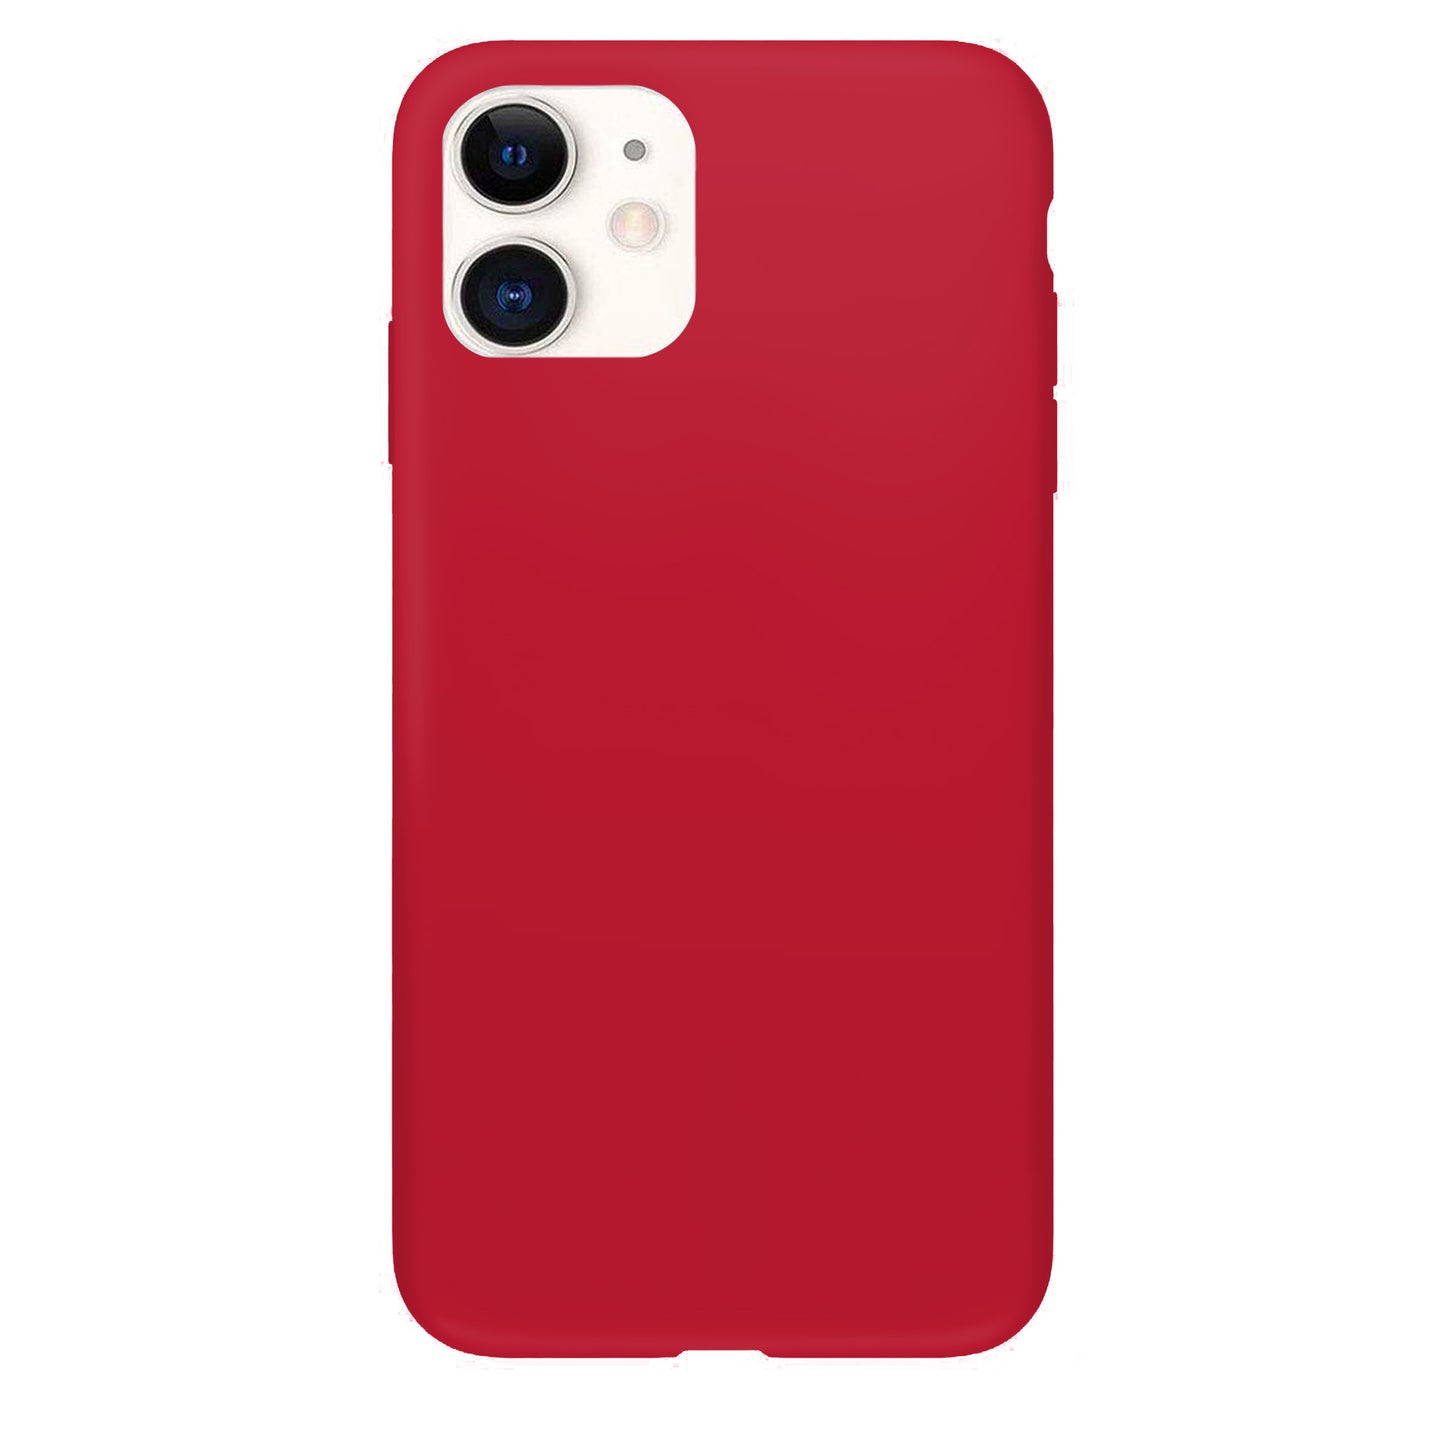 Carmine silicone case for iPhone and Samsung